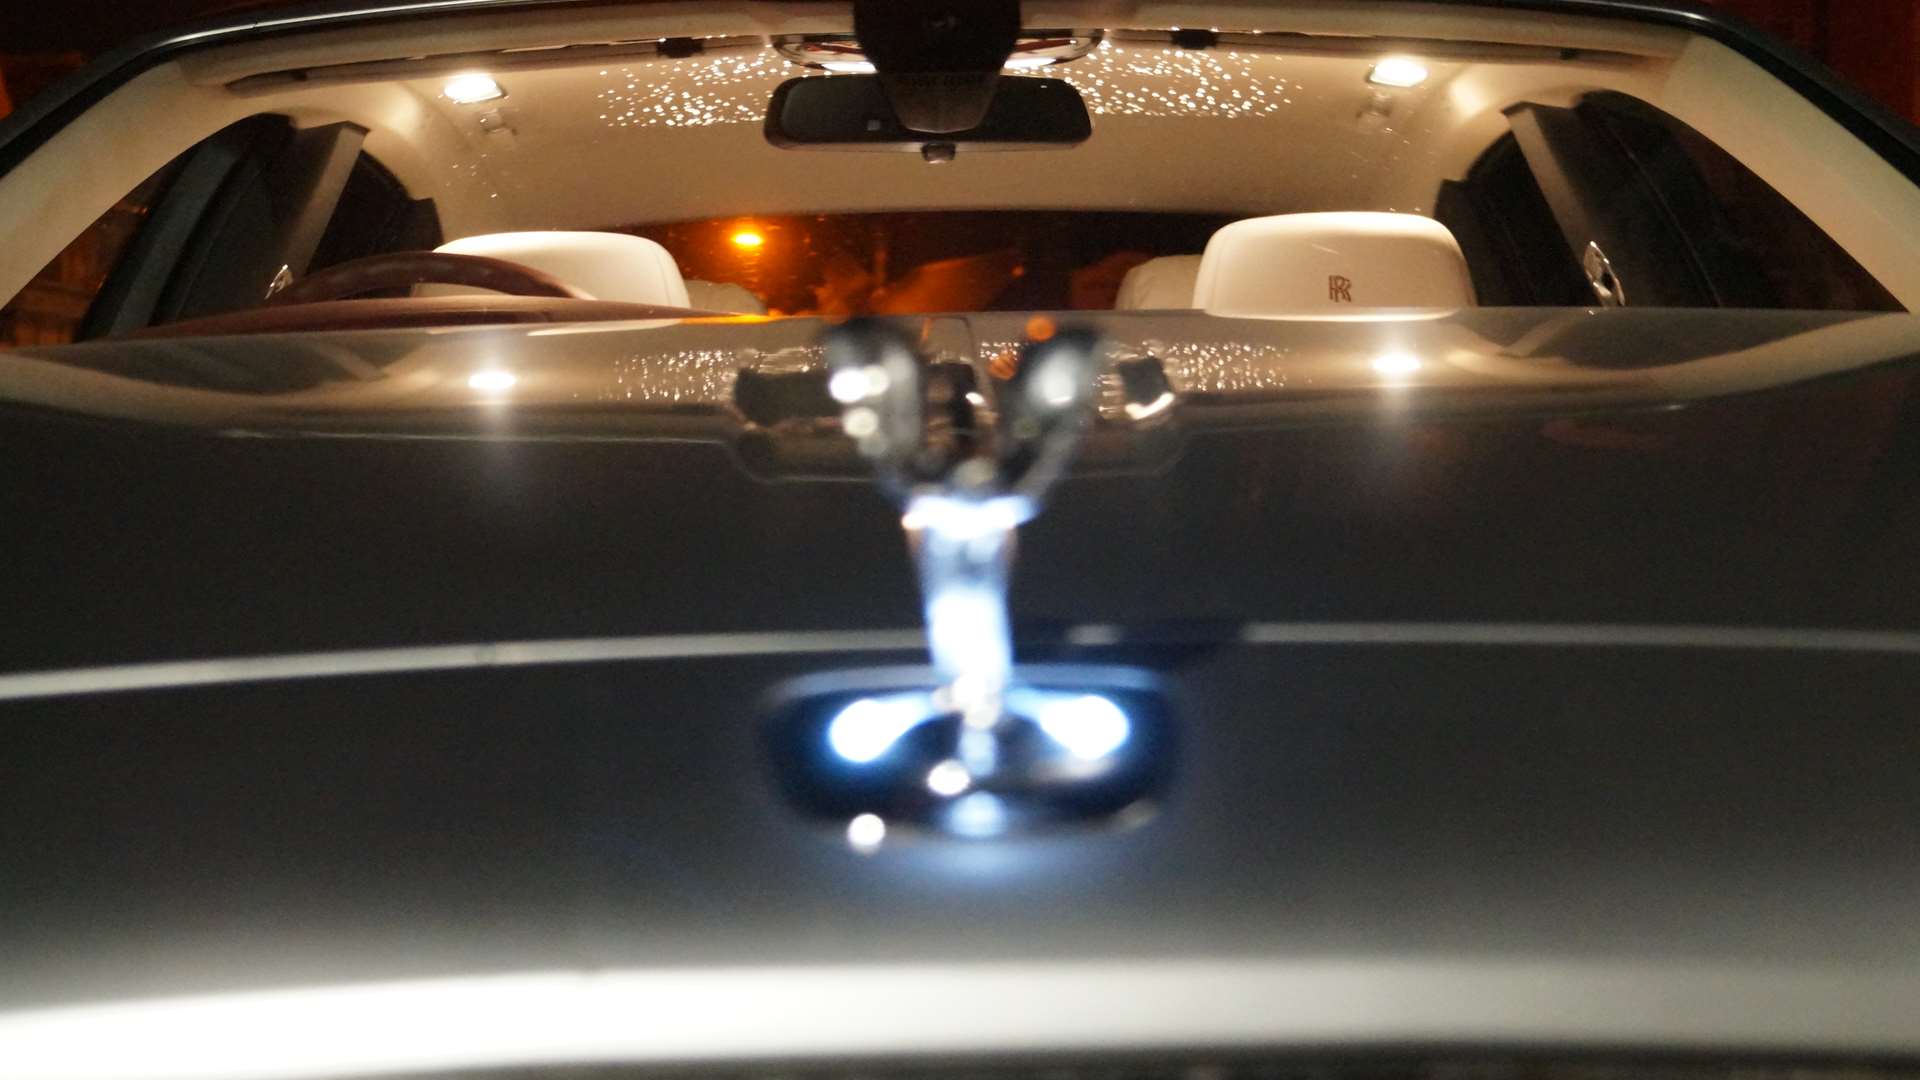 Don't forget to tick the Spirit of Ecstasy uplighter and Starlight headliner on the options list